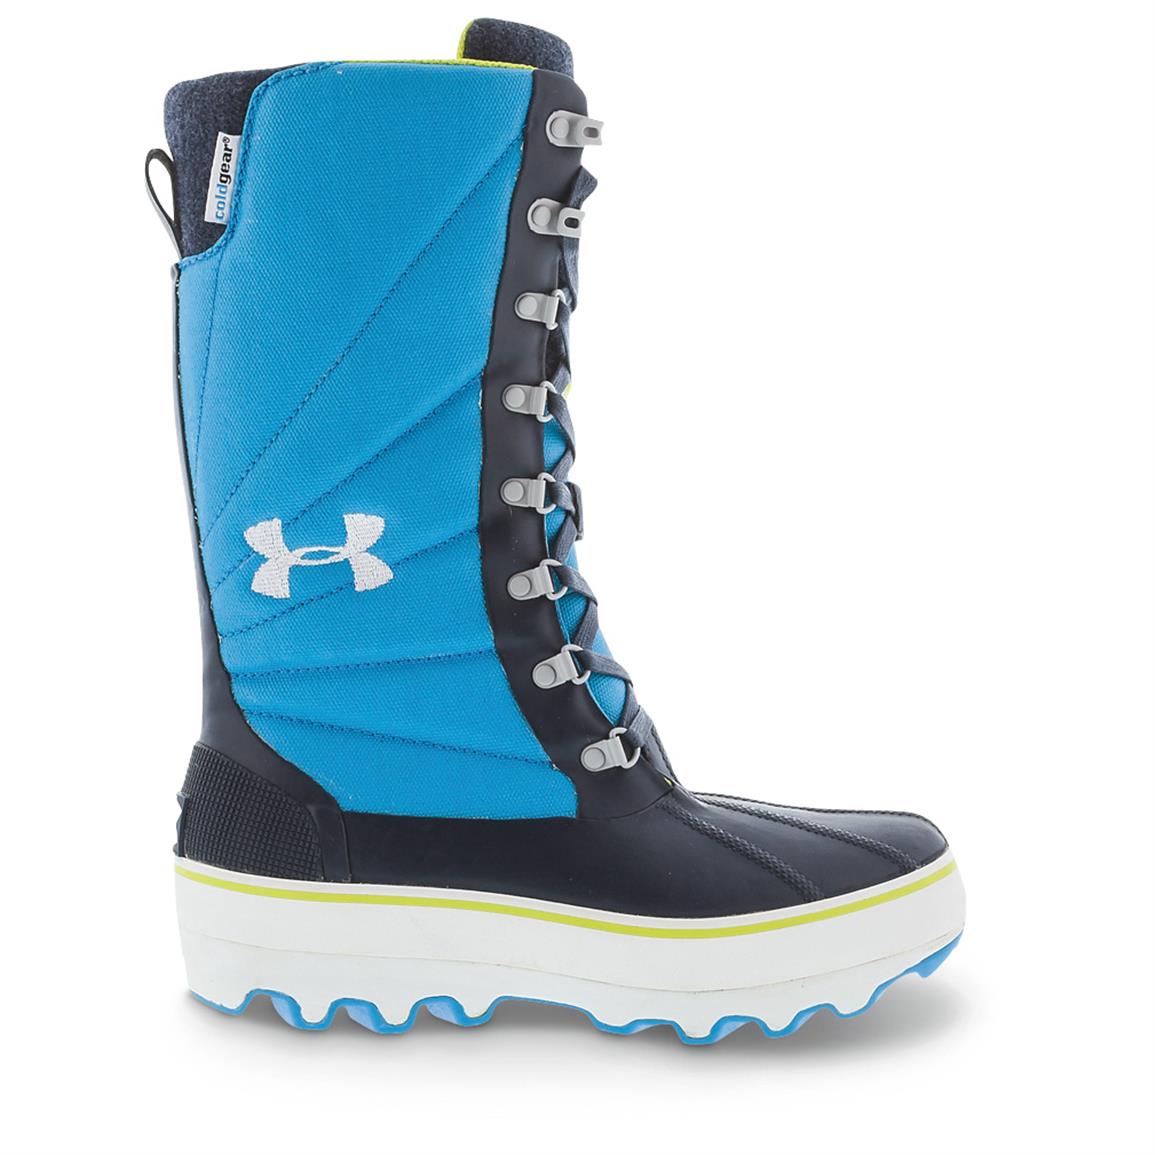 Cheap under armor snow boots Buy Online 